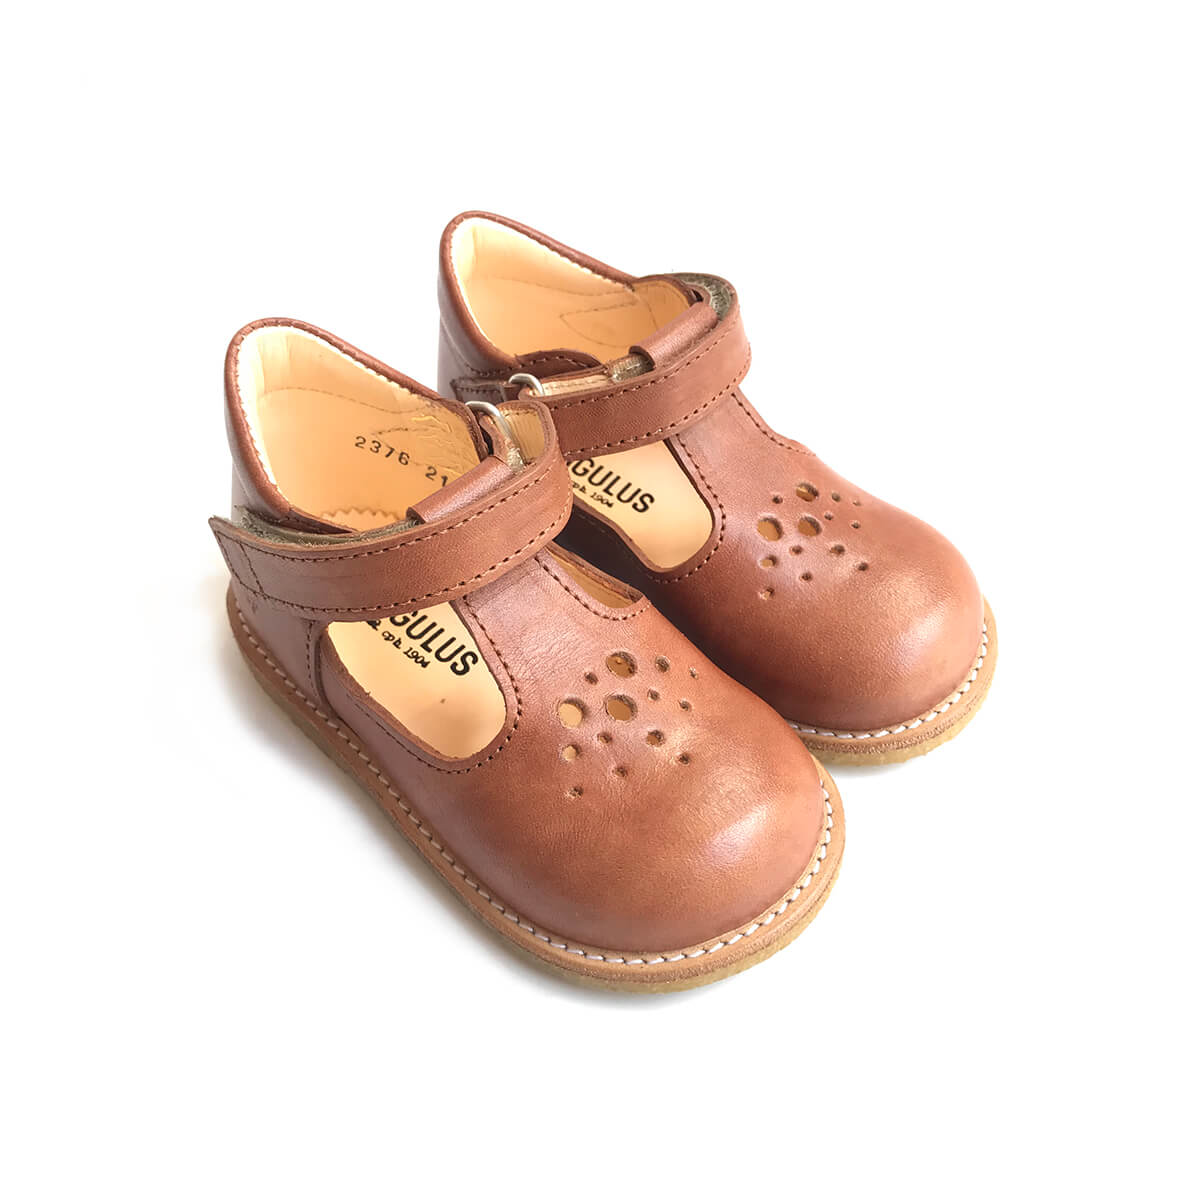 T Bar Starter Mary Janes in Tan by Angulus – Junior Edition